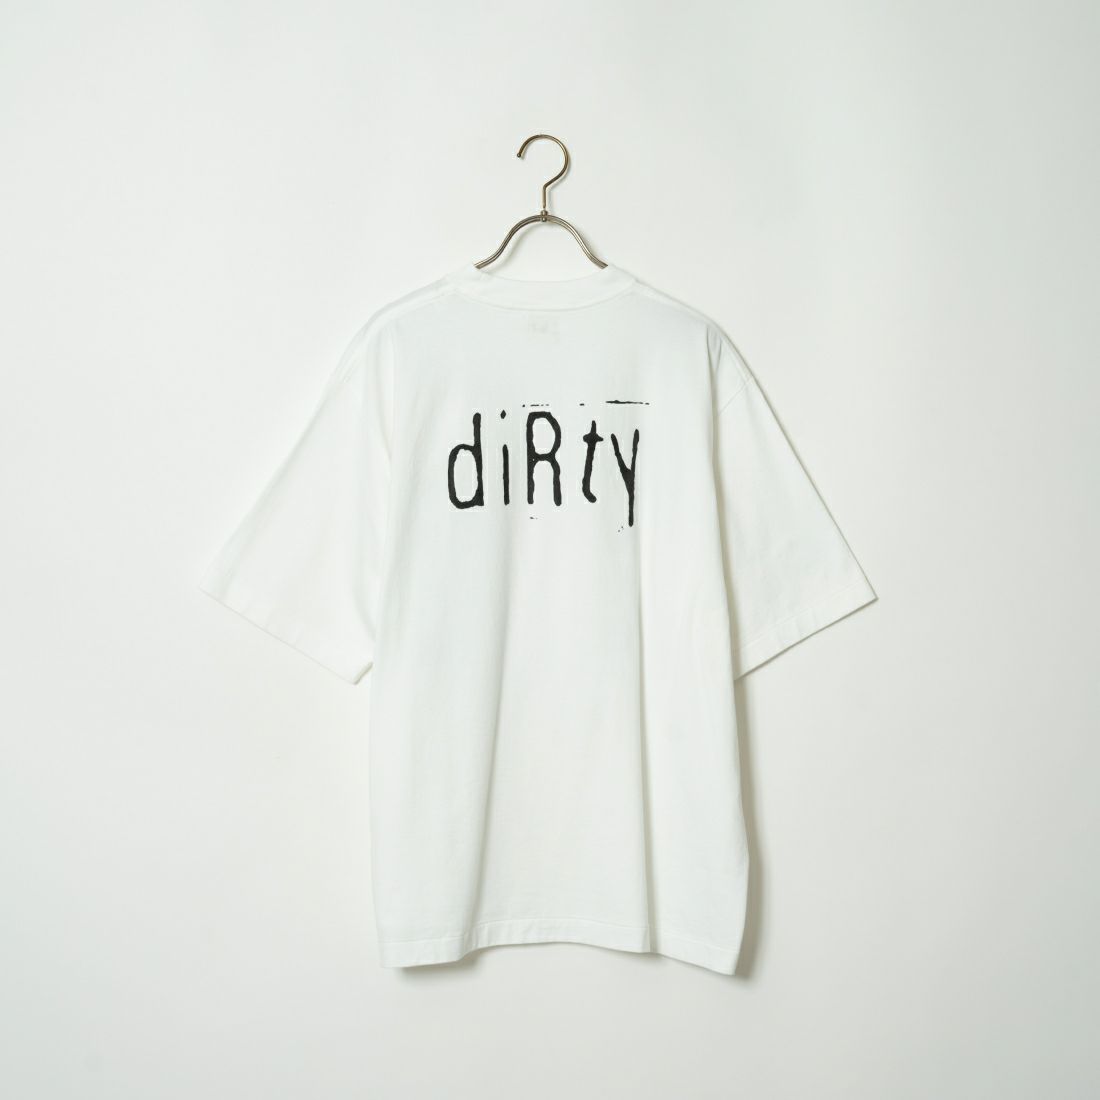 blurhms ROOTSTOCK [ブラームス ルーツストック] diRty ワイドプリントTシャツ [BROOTS24S34SONIC7] 01 WHITE